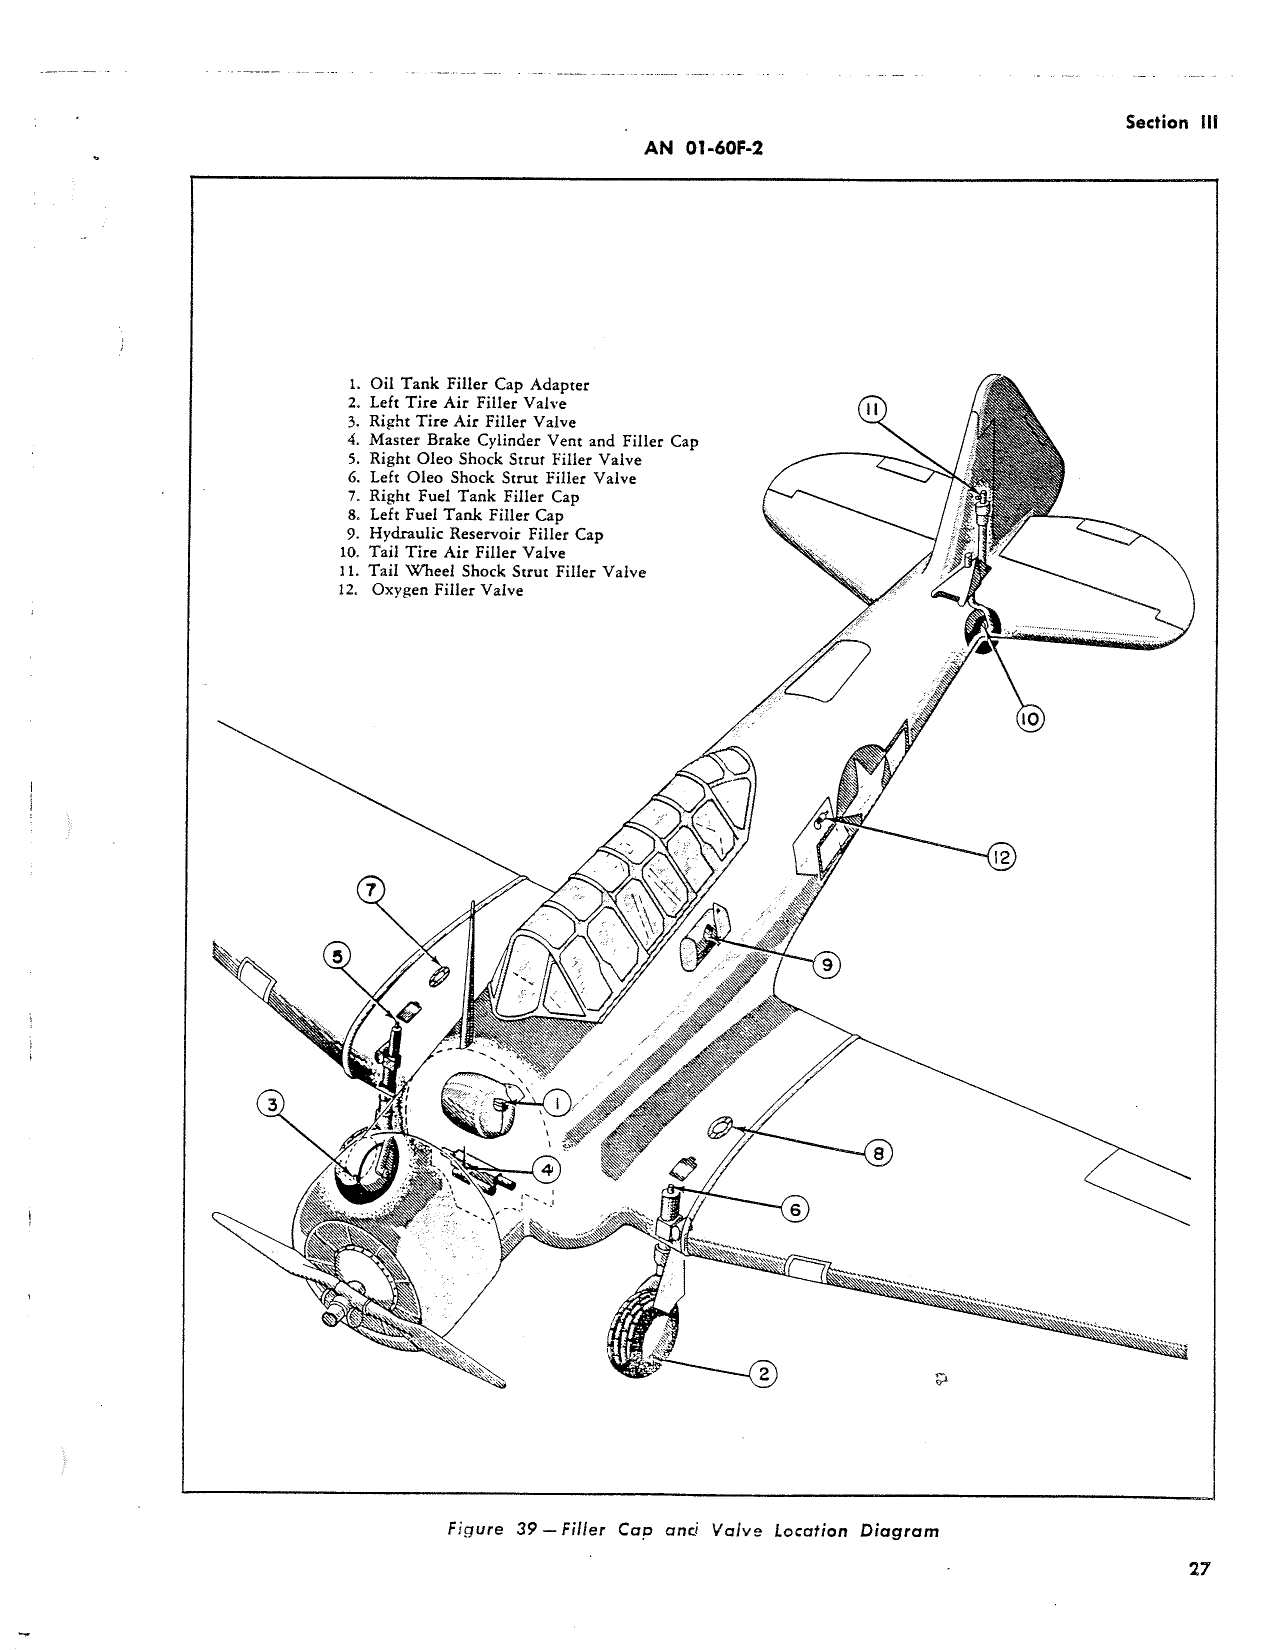 Sample page 48 from AirCorps Library document: Erection & Maintenance - T-6C, T-6D, SNJ-3, SNJ-4, SNJ-5, SNJ-6